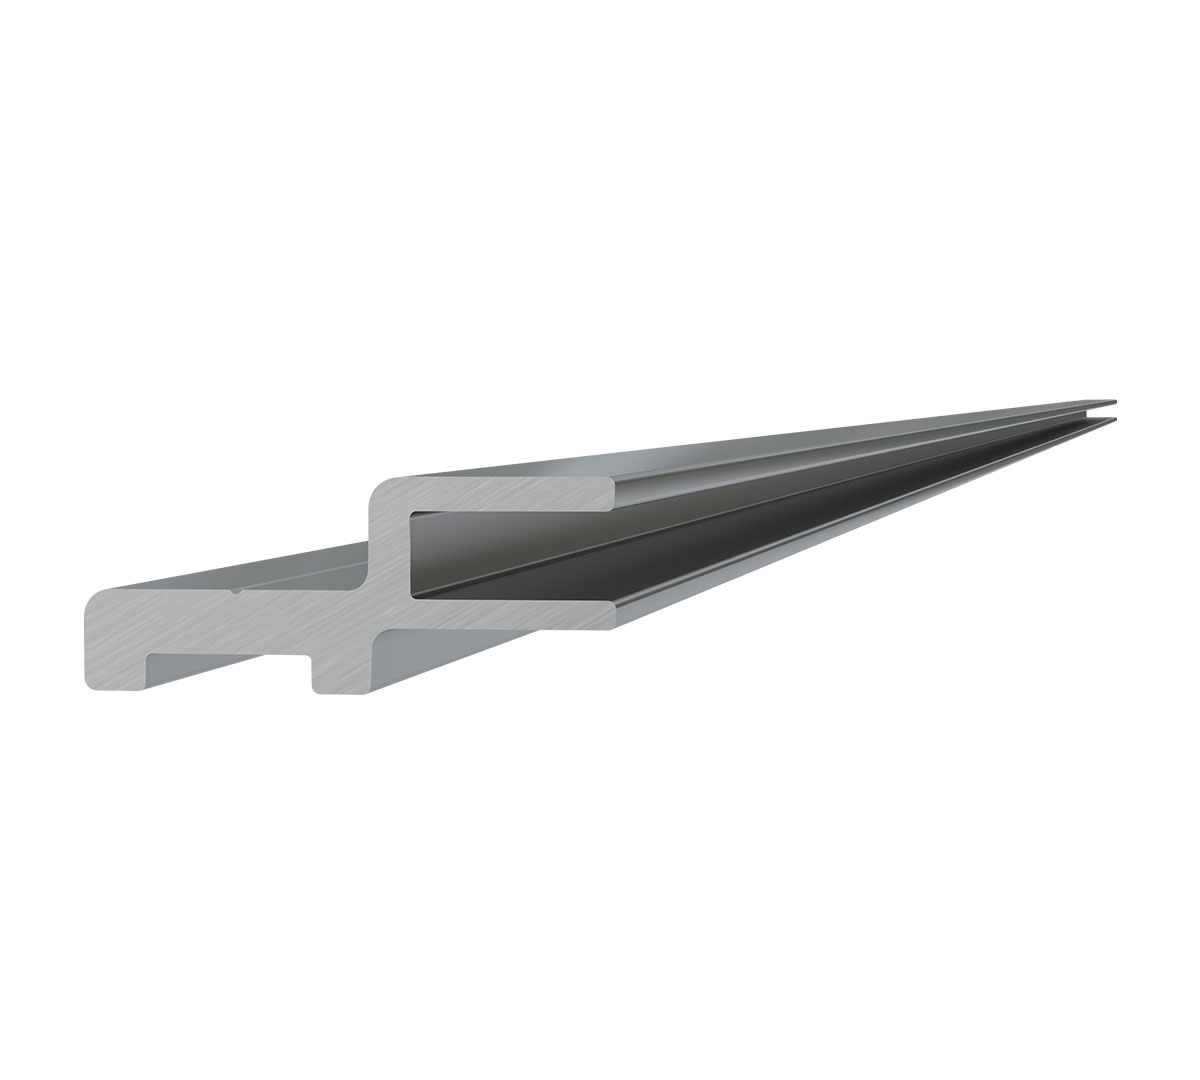 XL C 7054 MAGNETIC SUPPORT PROFILE-2.5M